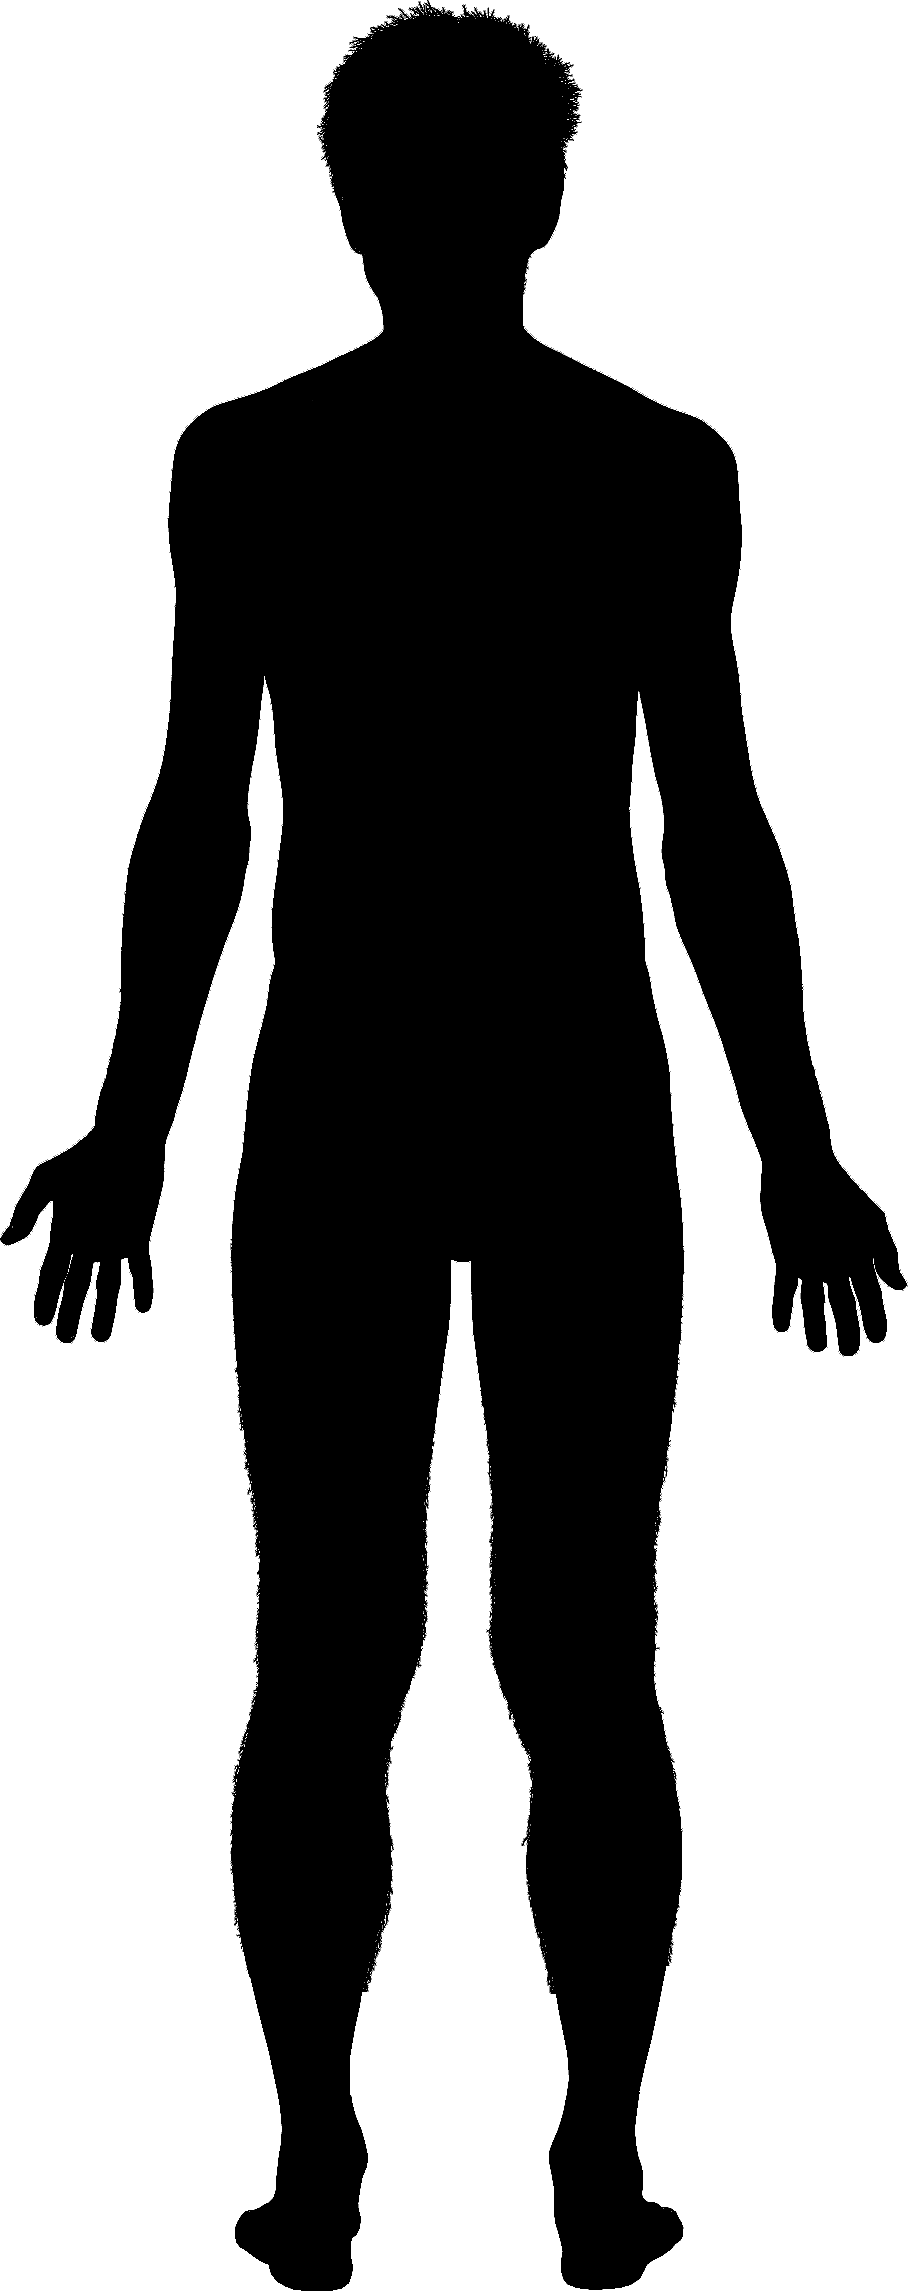 Black Outline Of A Person - ClipArt Best